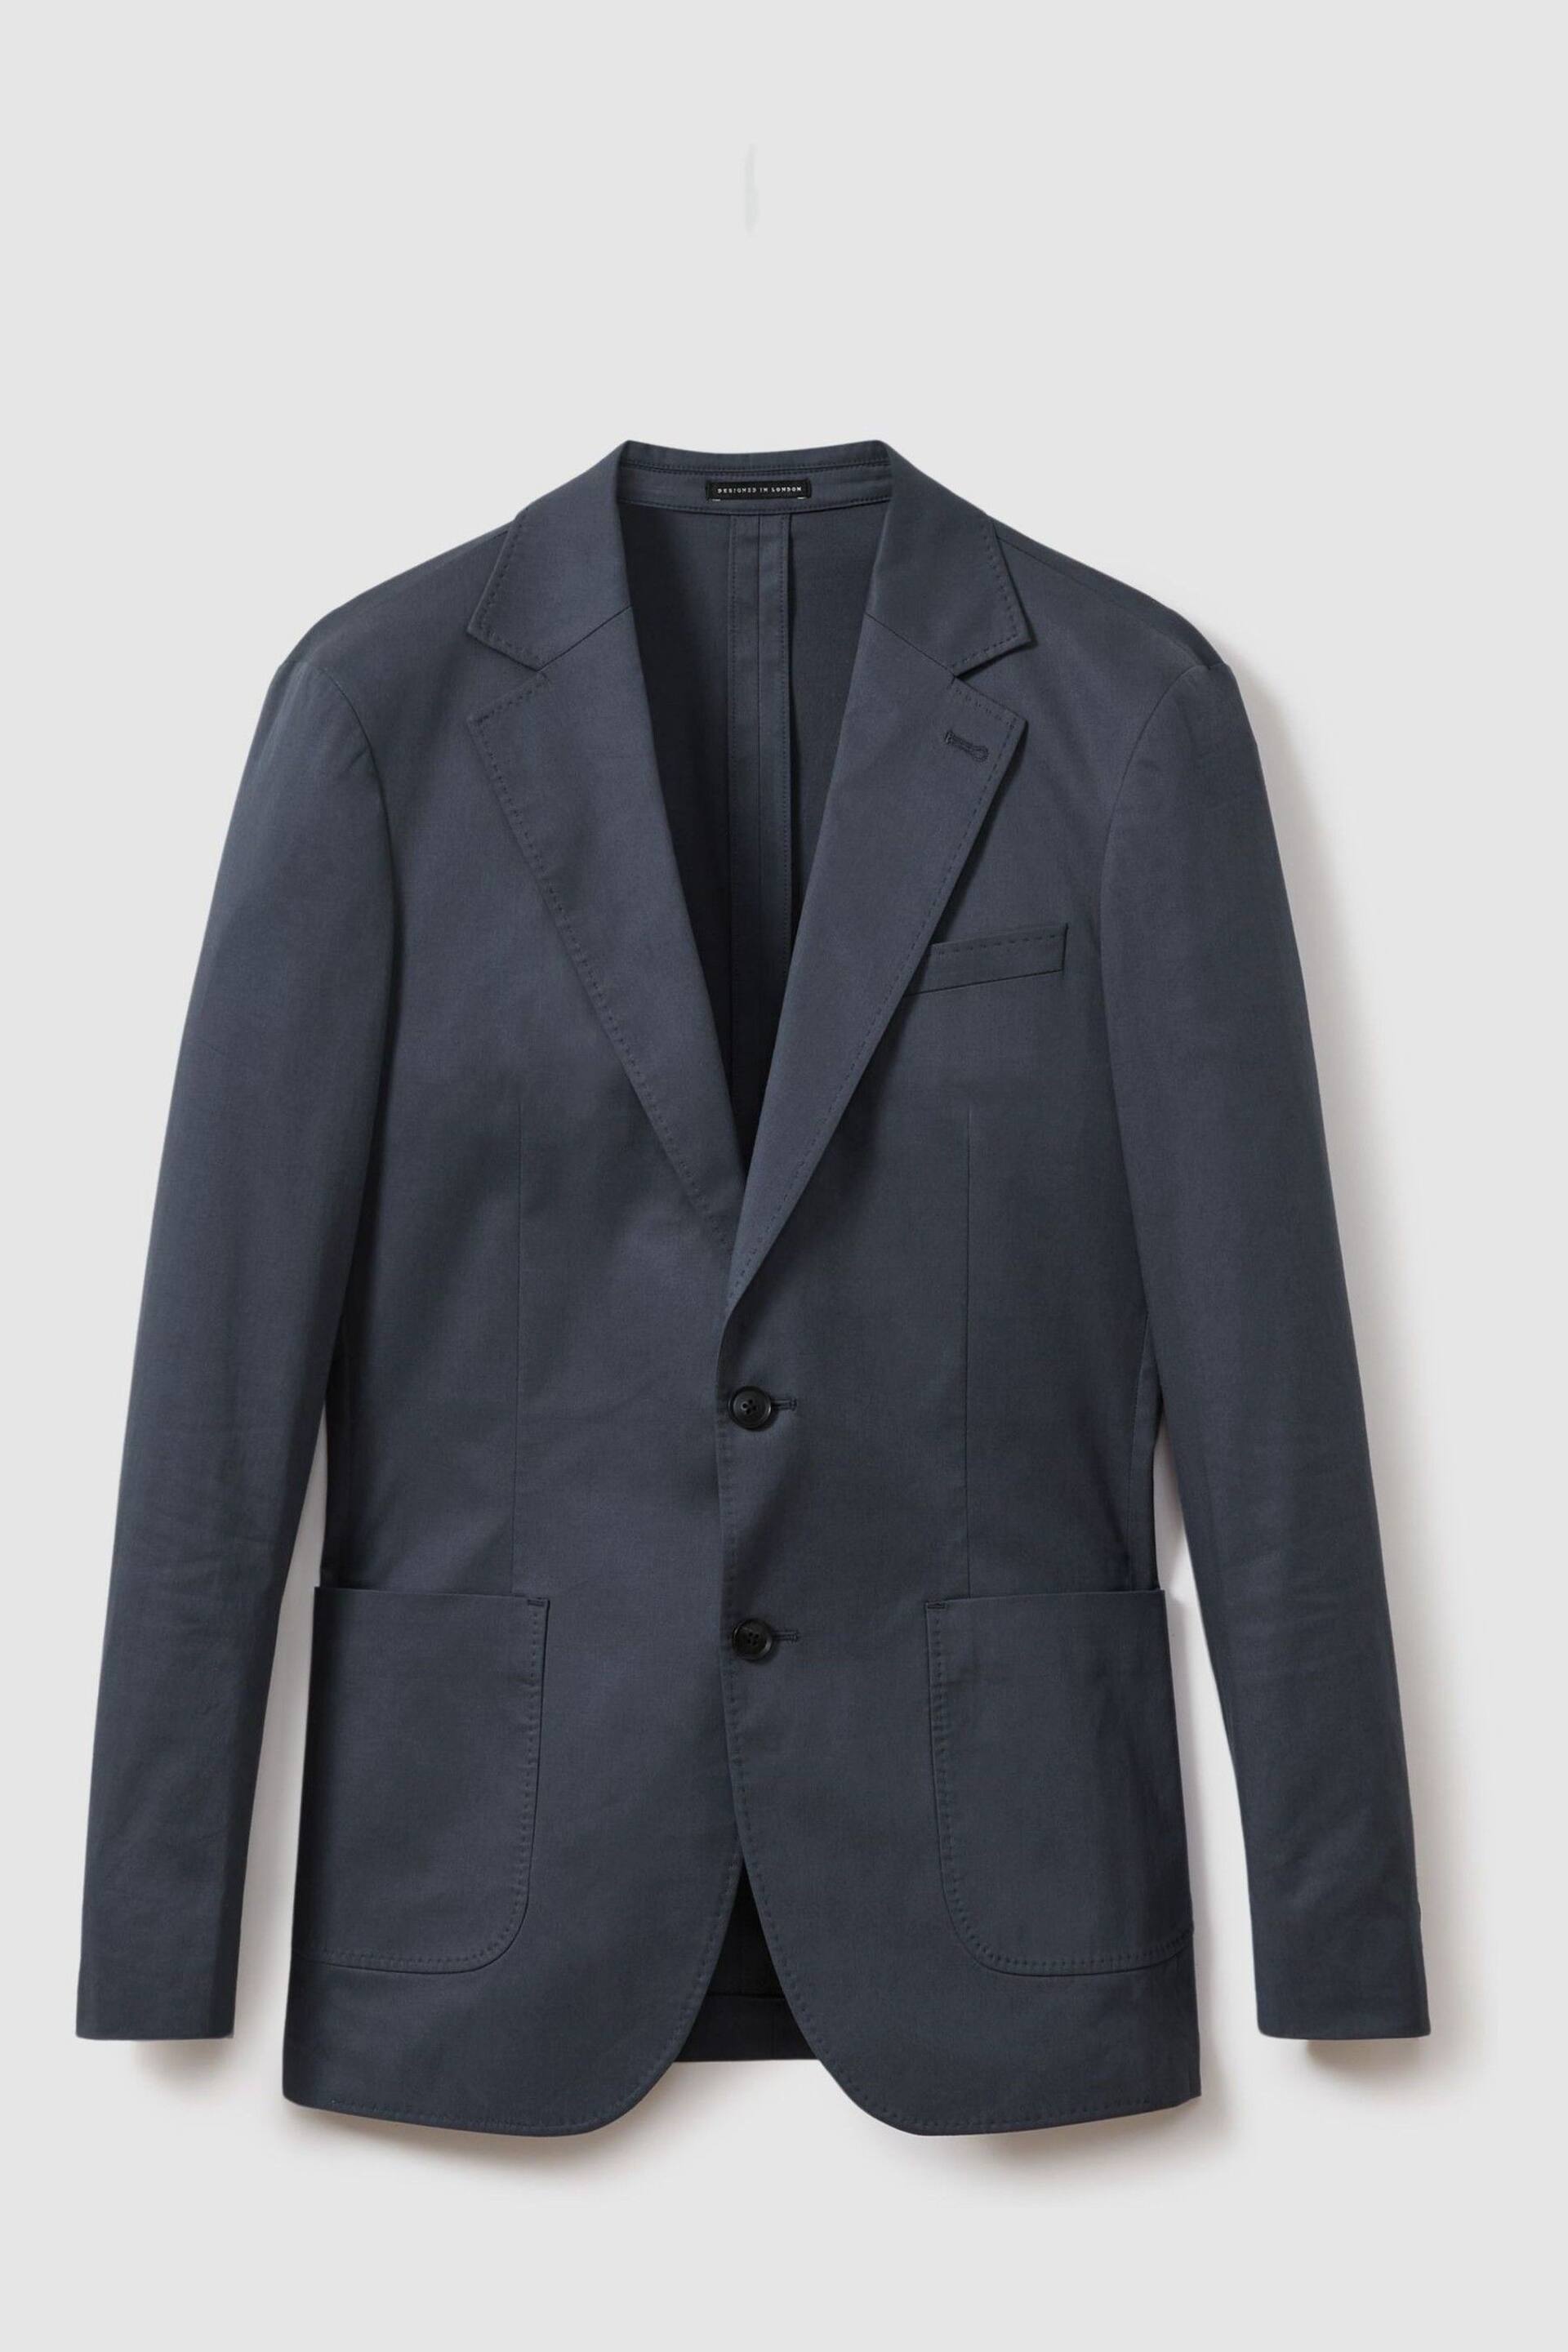 Reiss Airforce Blue Crawford Slim Fit Cotton Blend Single Breasted Blazer - Image 2 of 7